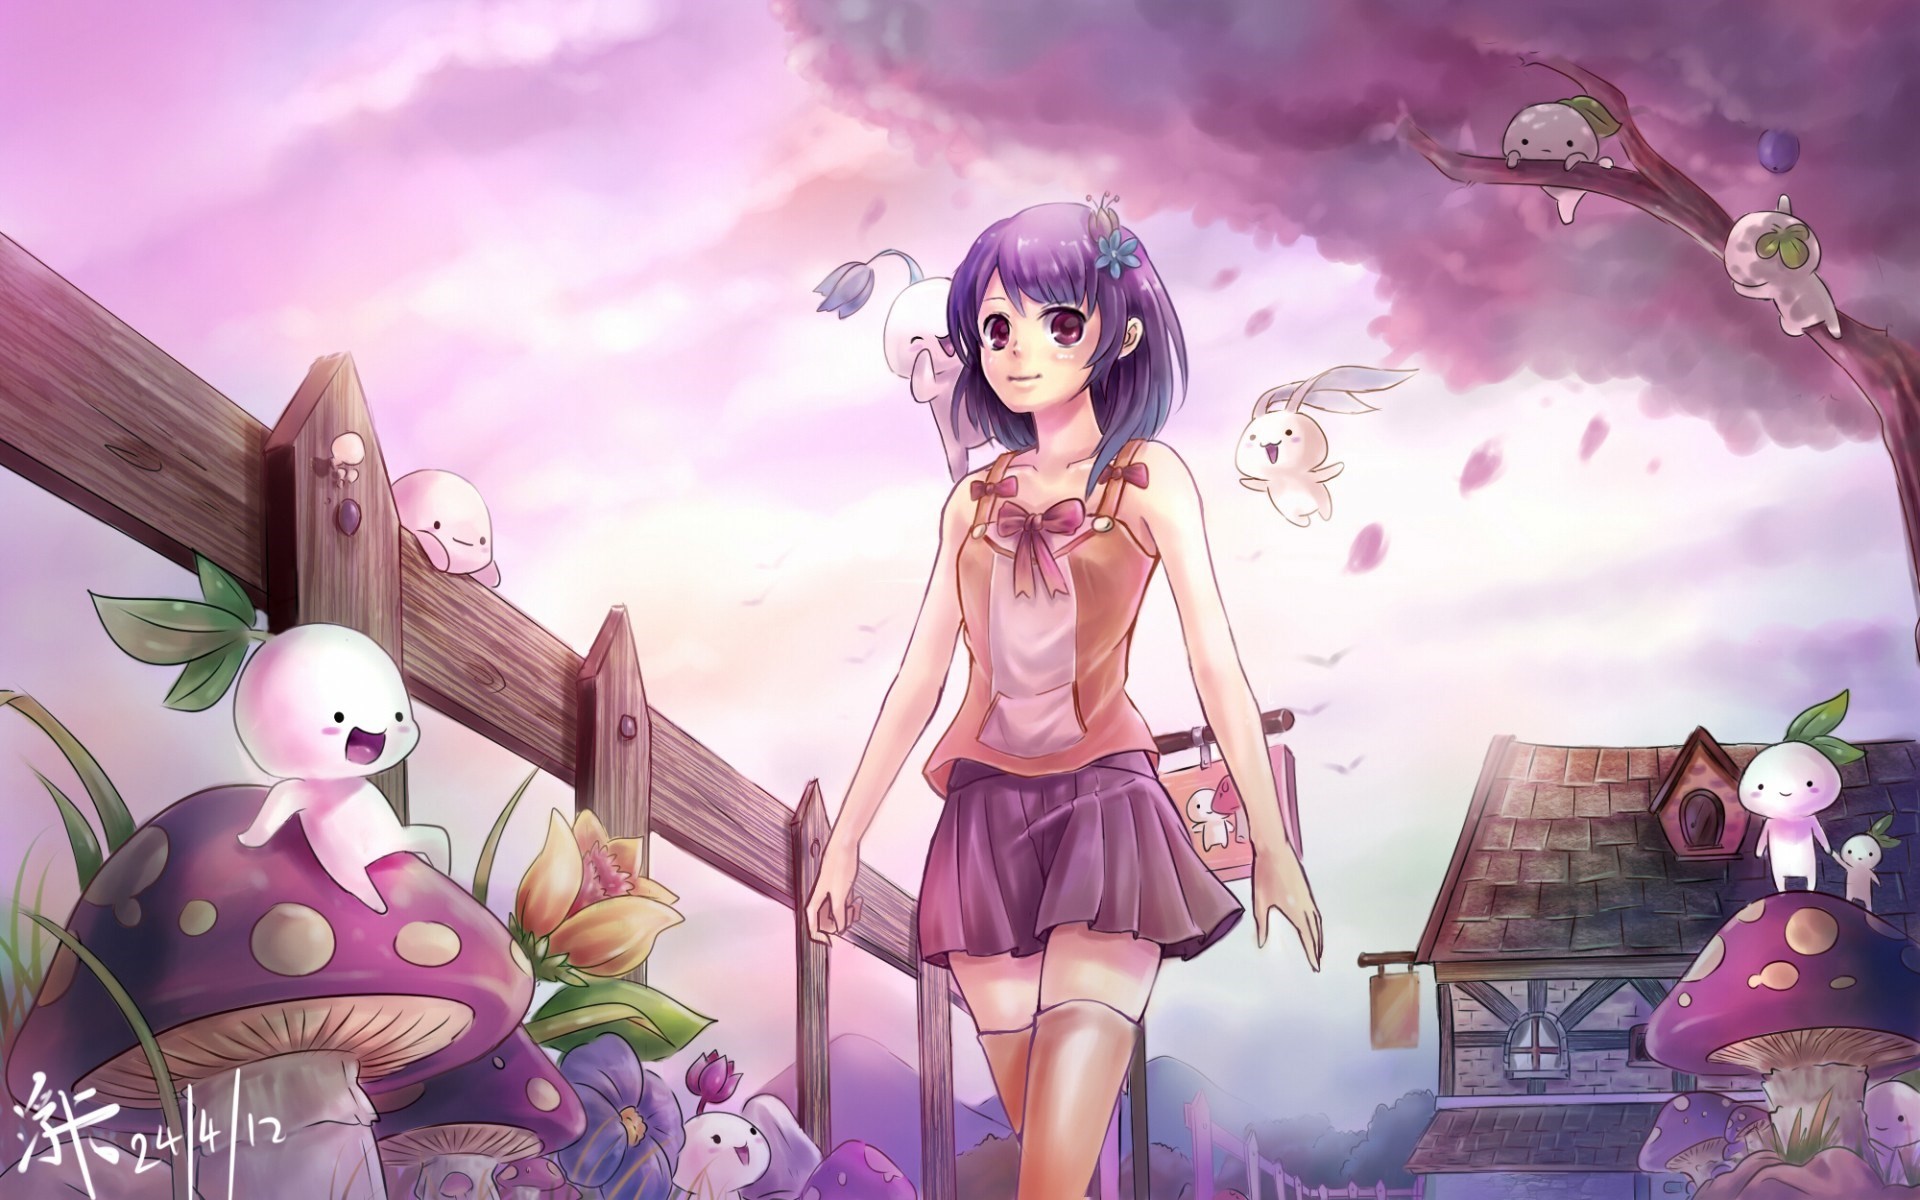 Download 21 pink-anime-wallpaper Blue-and-pink-sky-painting-illustration-city-anime-.jpg